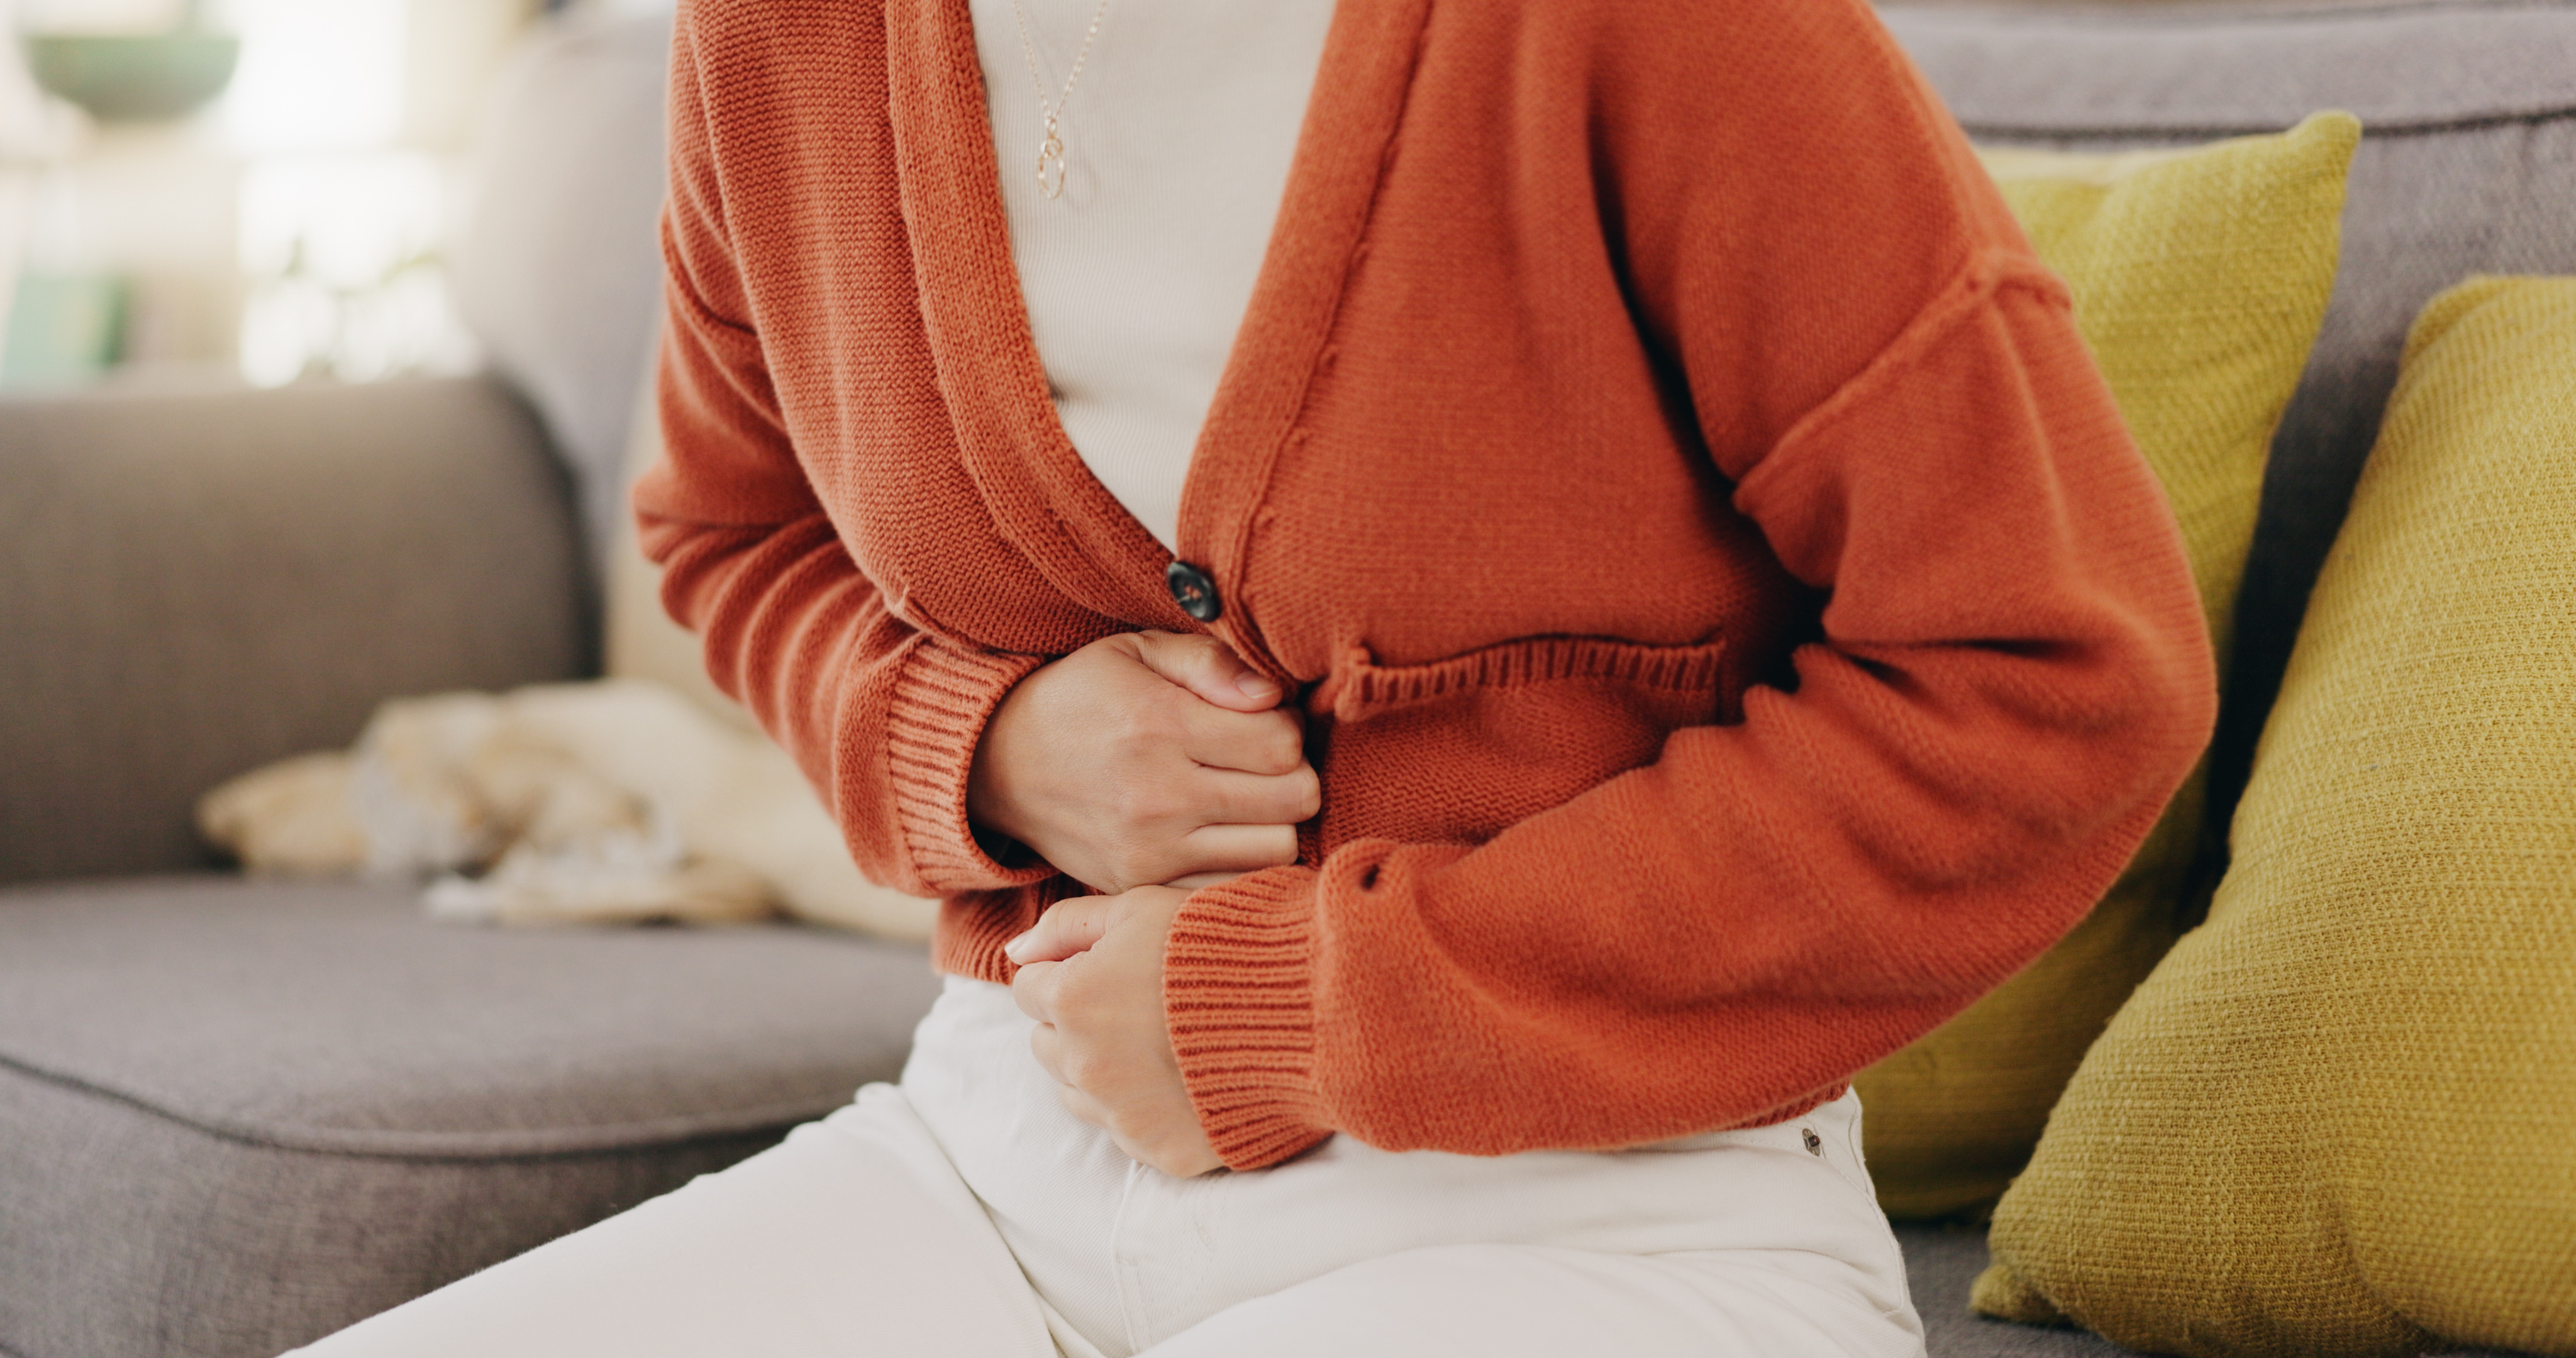 A woman experiencing stomach pain - learn how you can find relief with Vida-Flo's IV hydration treatment for gastrointestinal diseases in Buckhead, GA.